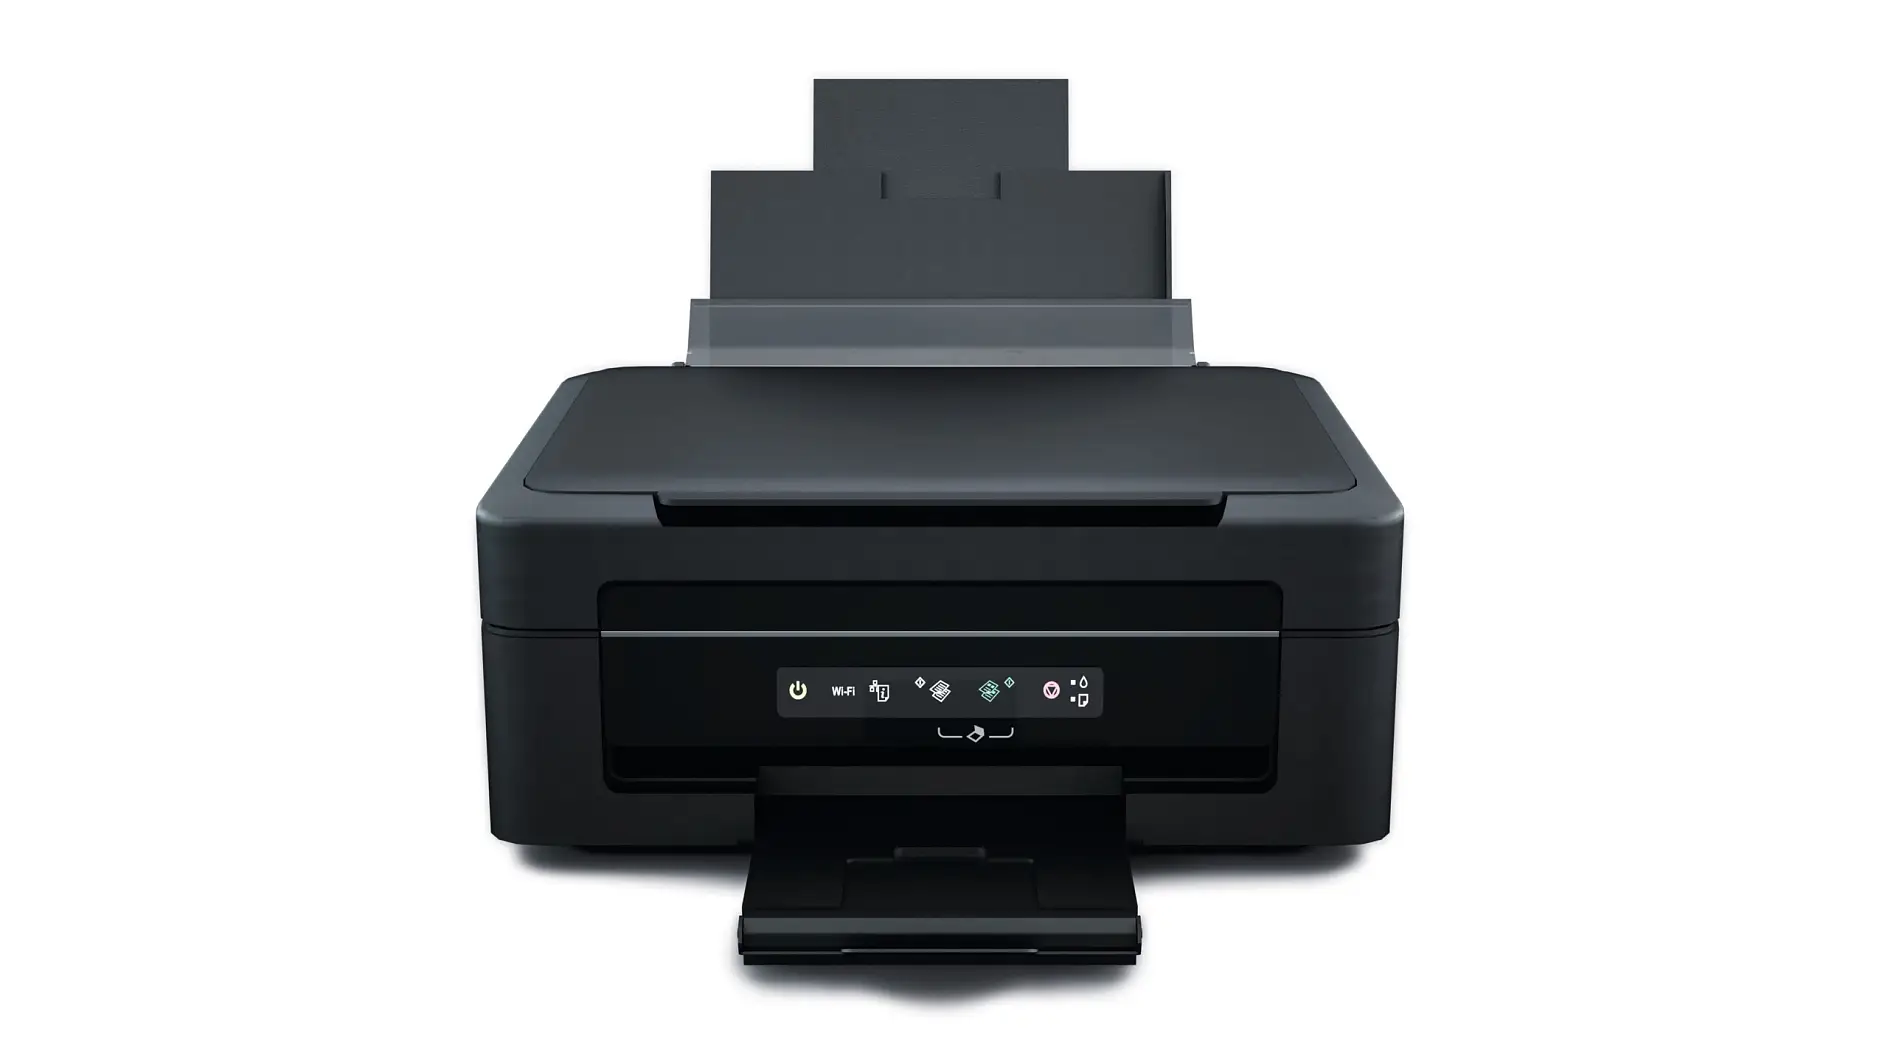 A variety of tape solutions can be used for a wide range of different applications for multifunction printers.